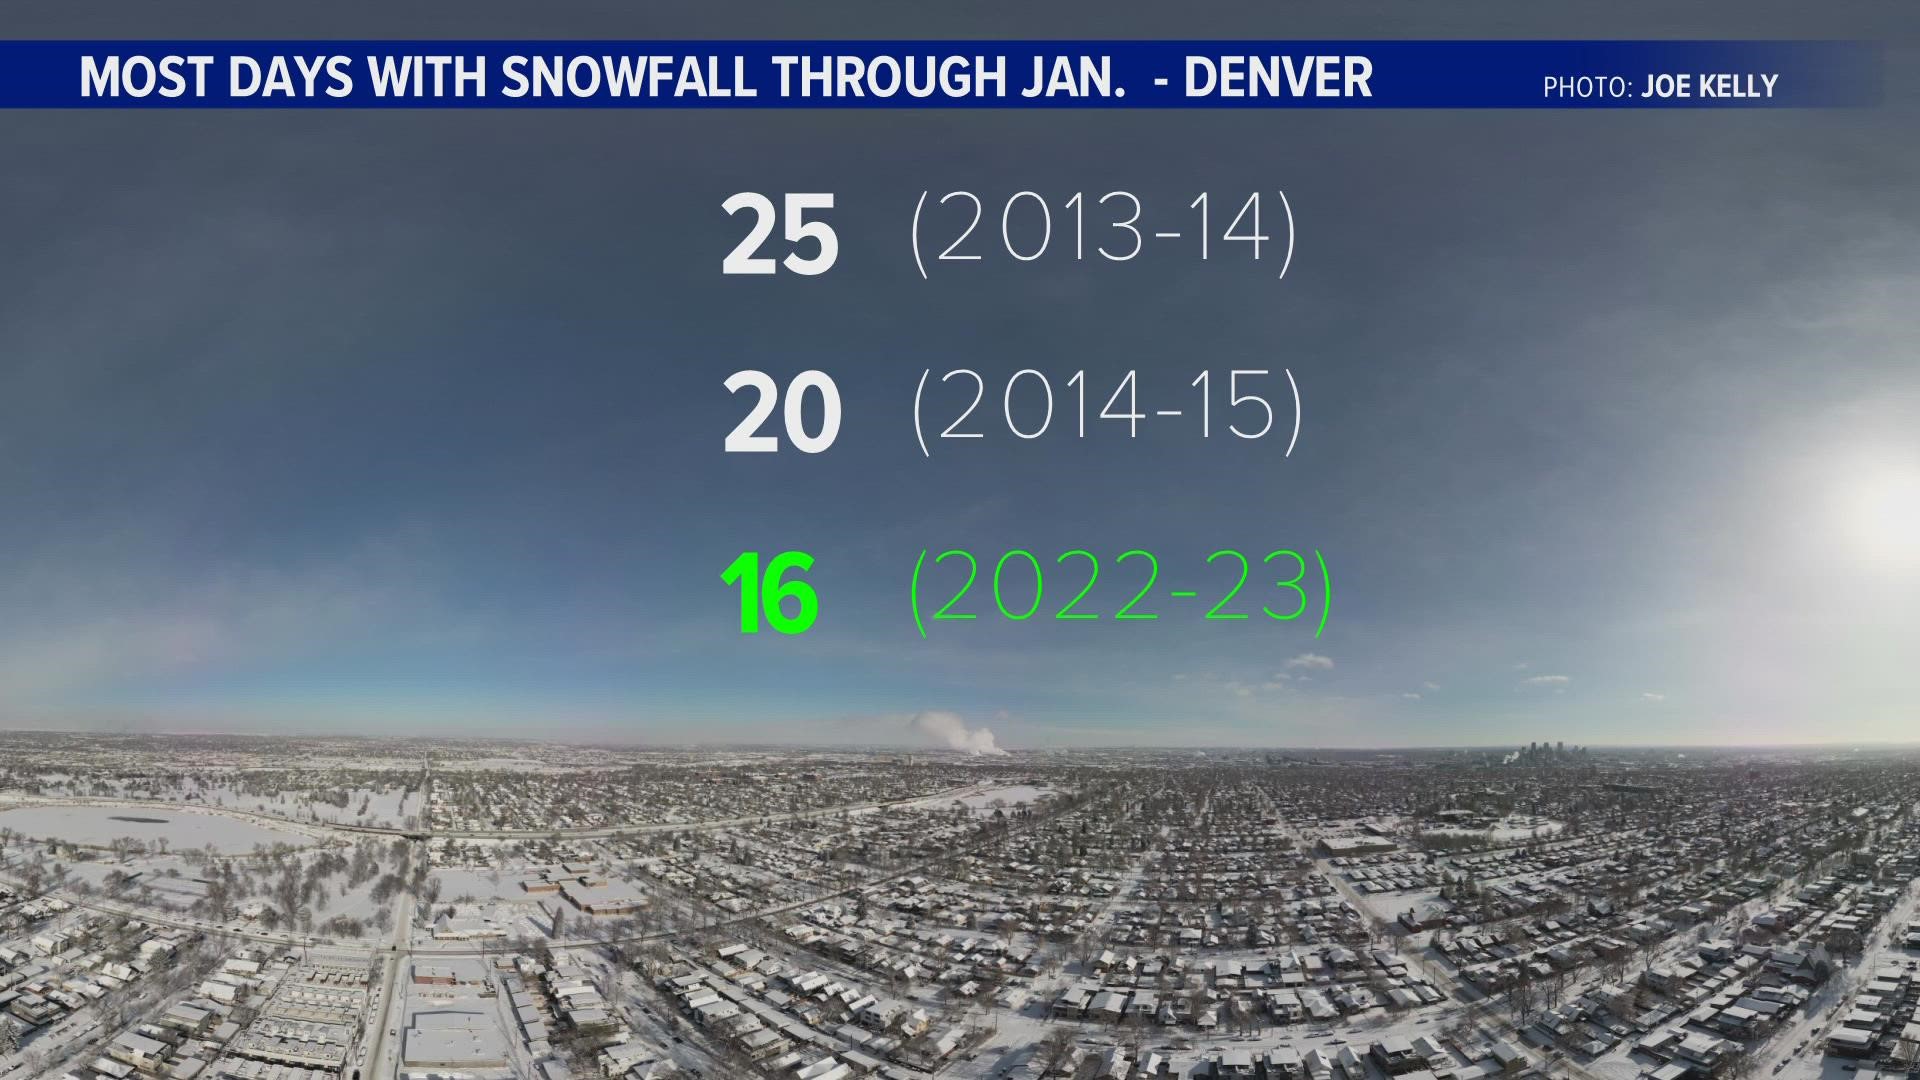 9NEW Meteorologist Cory Reppenhagen discusses and details statistics on the unusual winter in Denver.